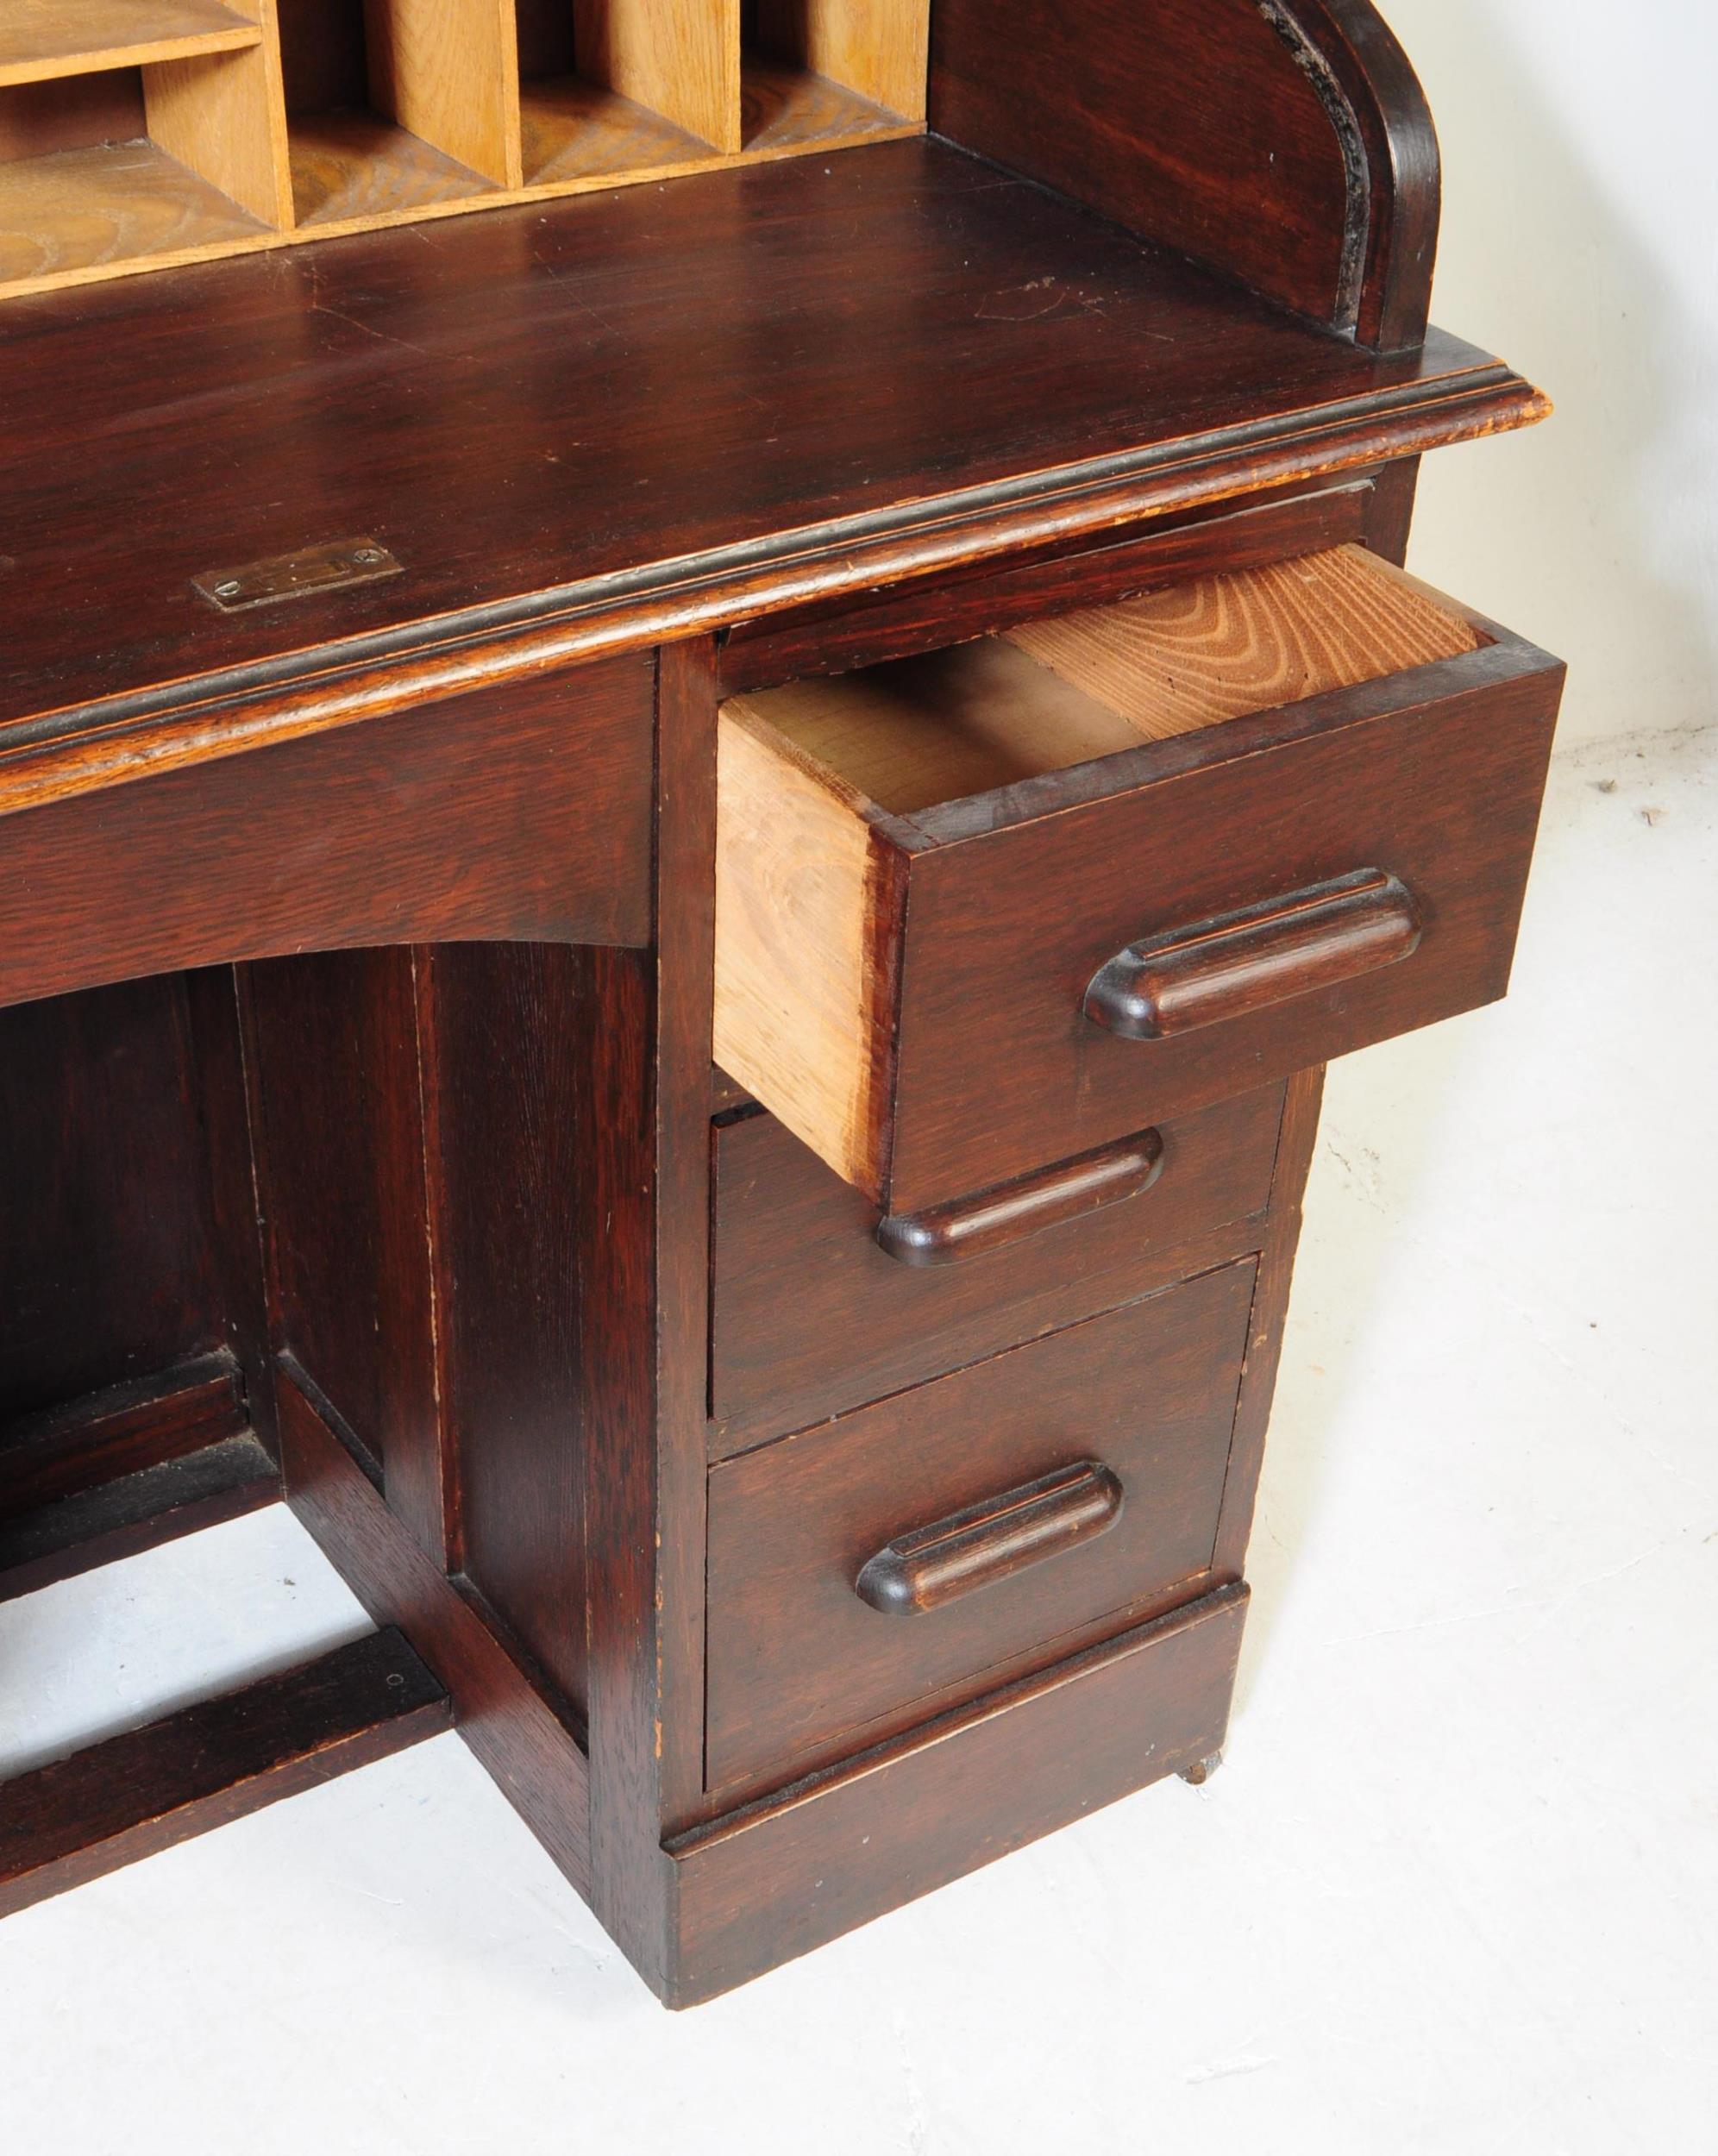 EARLY 20TH CENTURY MAHOGANY ROLL TOP DESK - Image 4 of 7